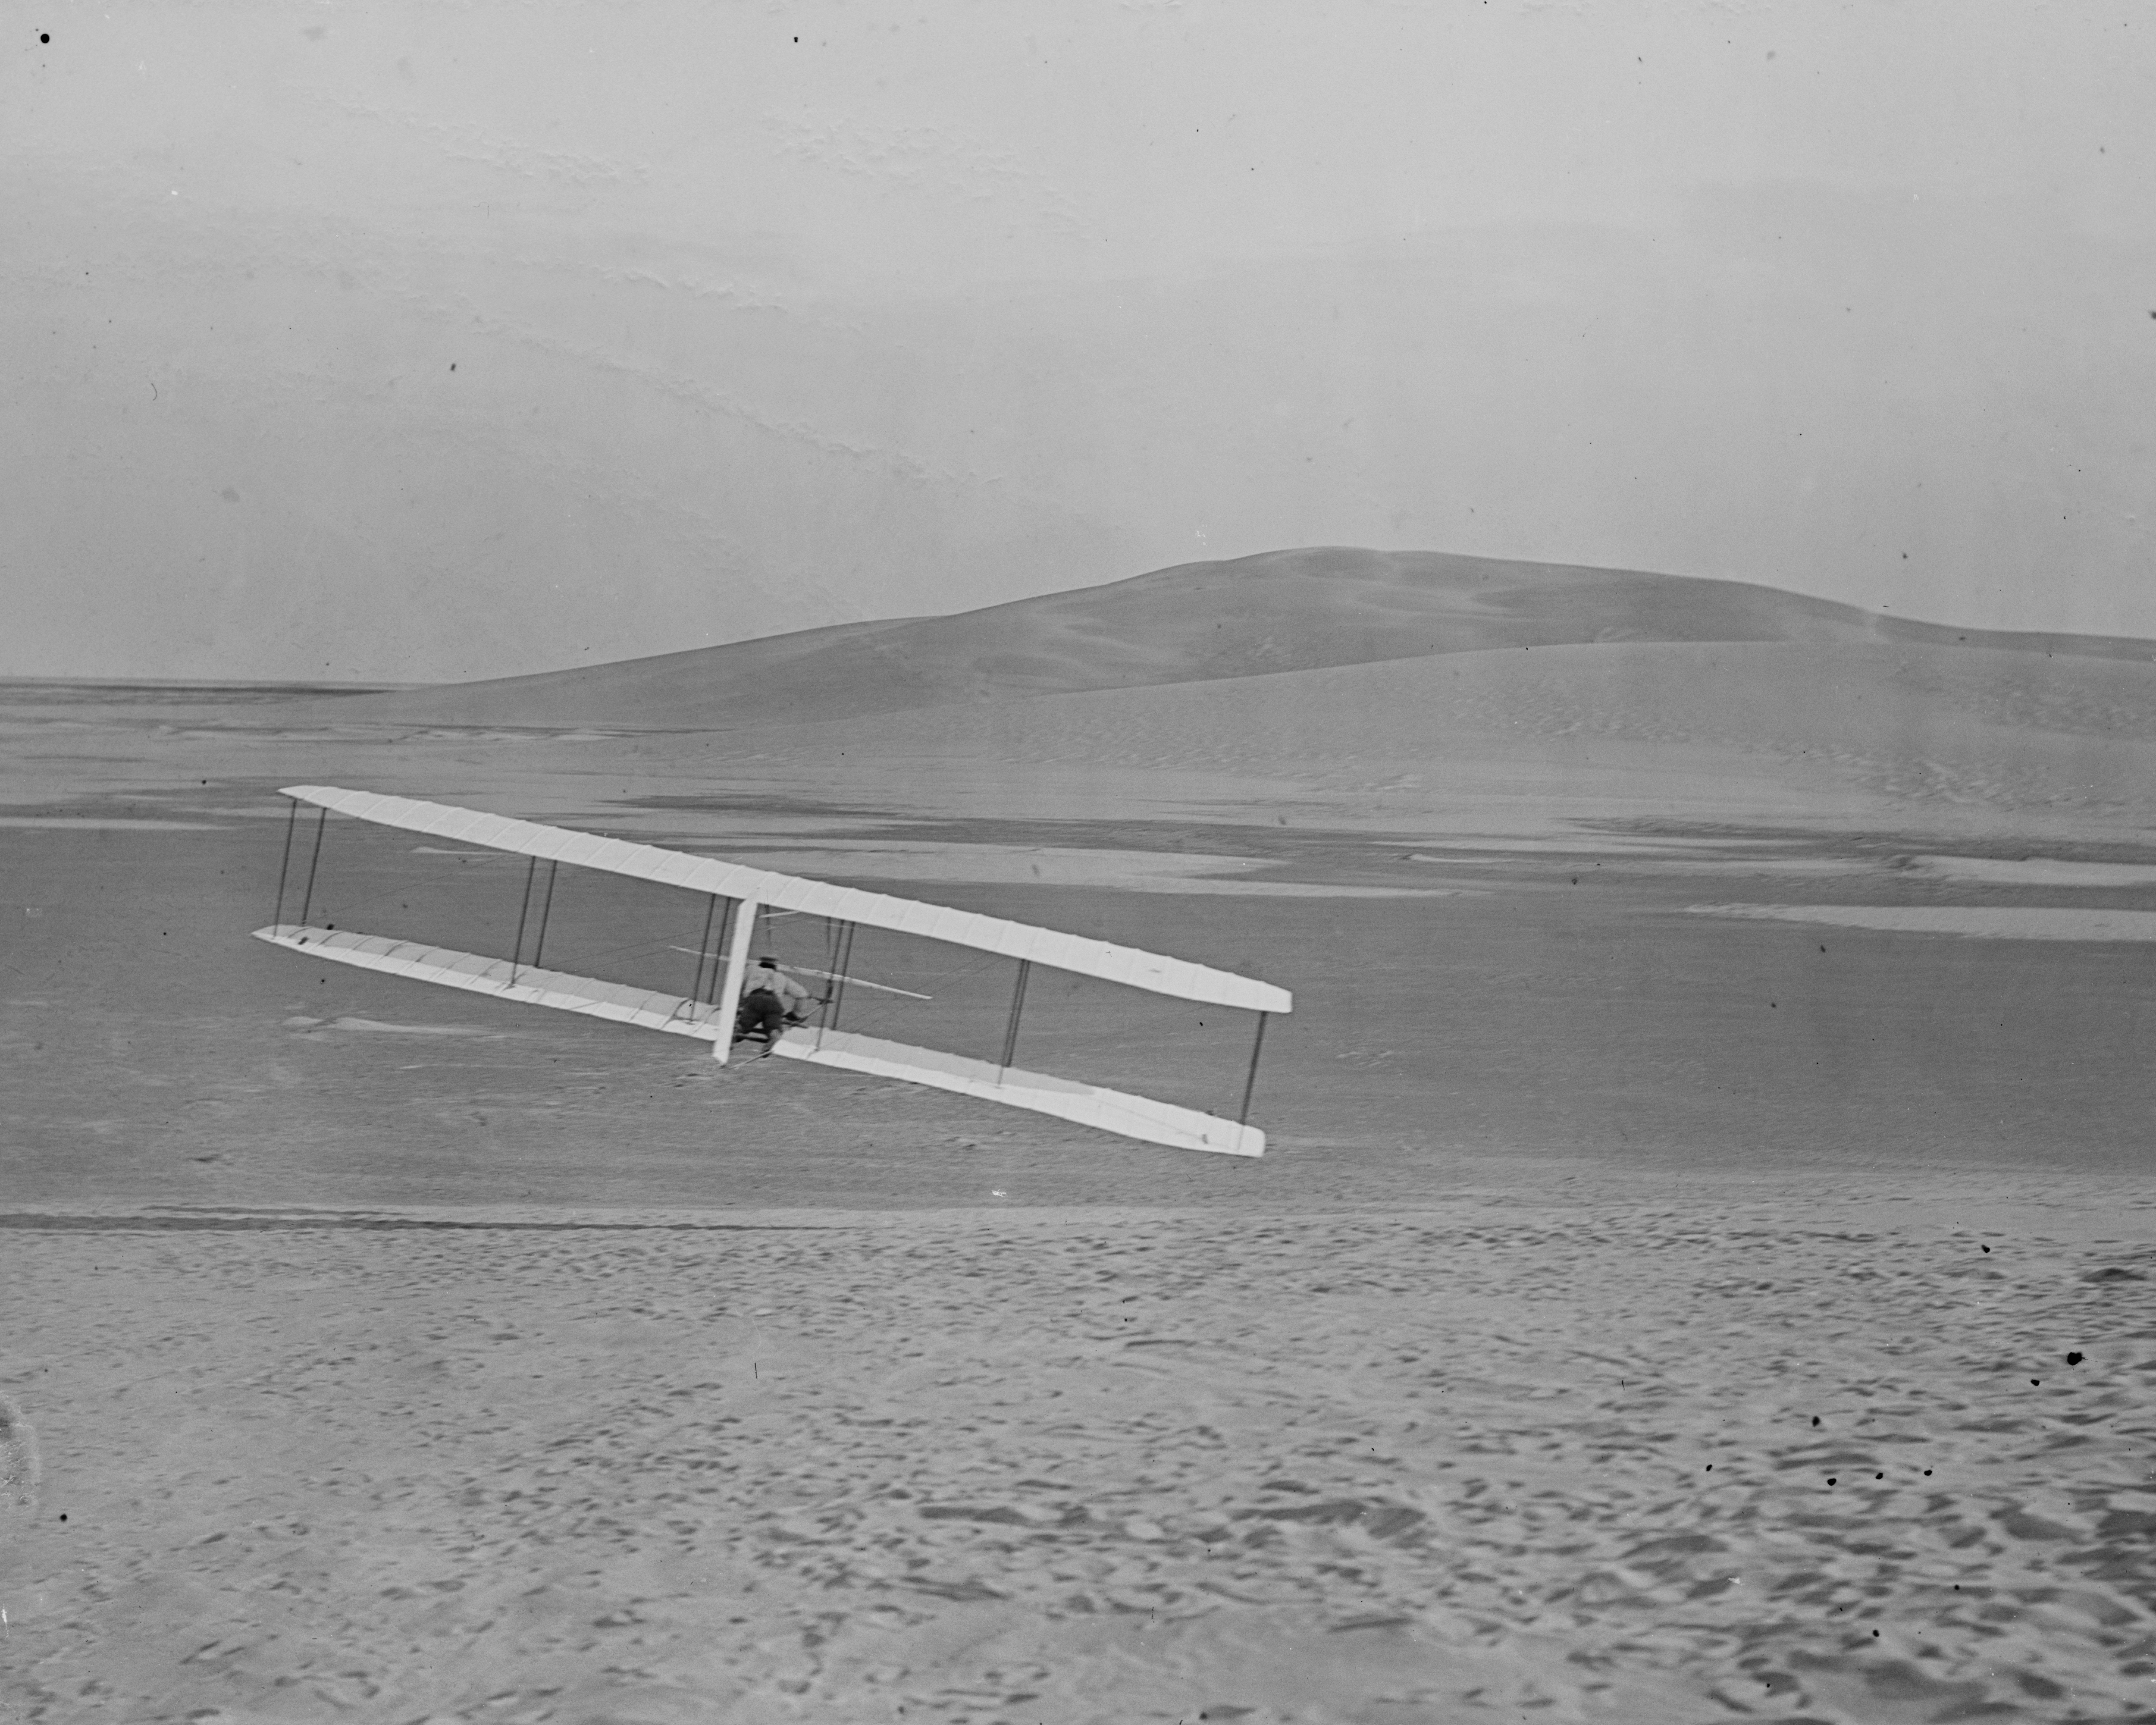 1902 Wright glider in right turn (cropped)